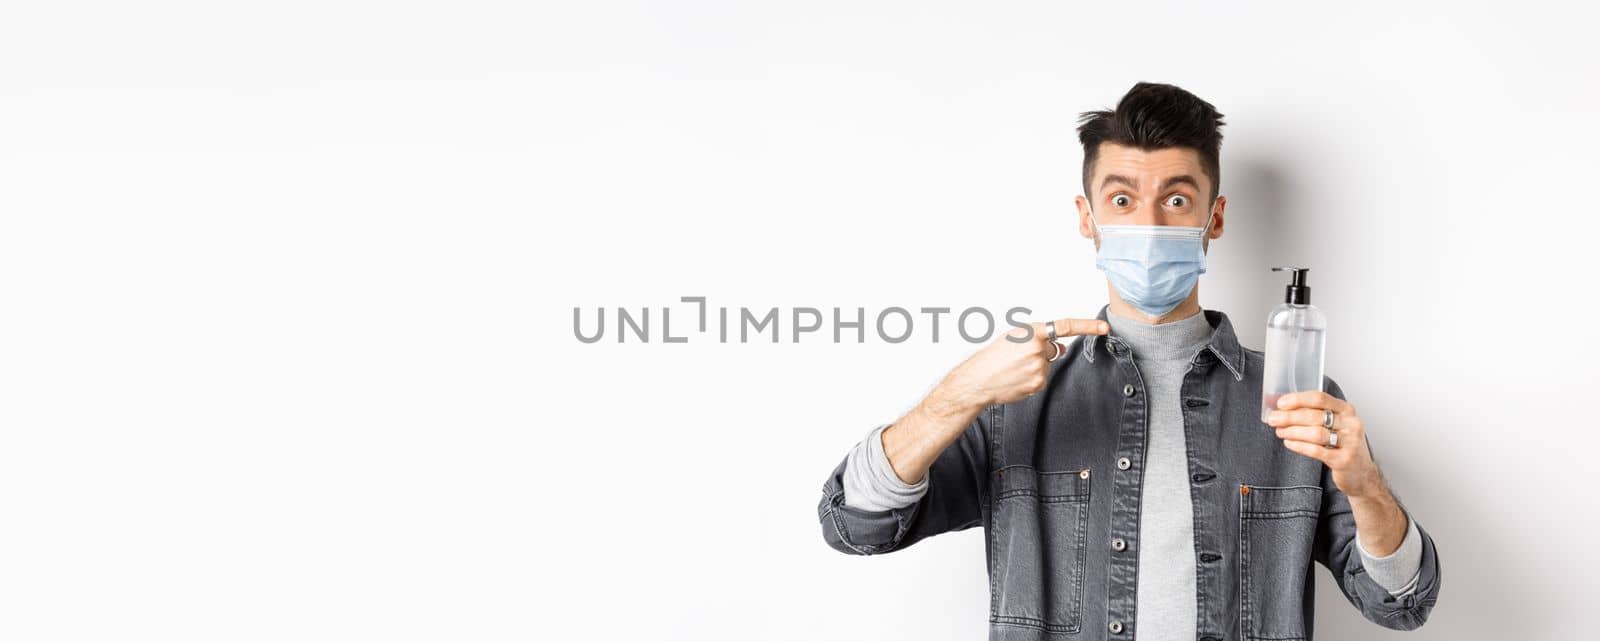 Health, covid and pandemic concept. Stylish guy in medical mask pointing at bottle with hand sanitizer, showing antiseptic, standing on white background.